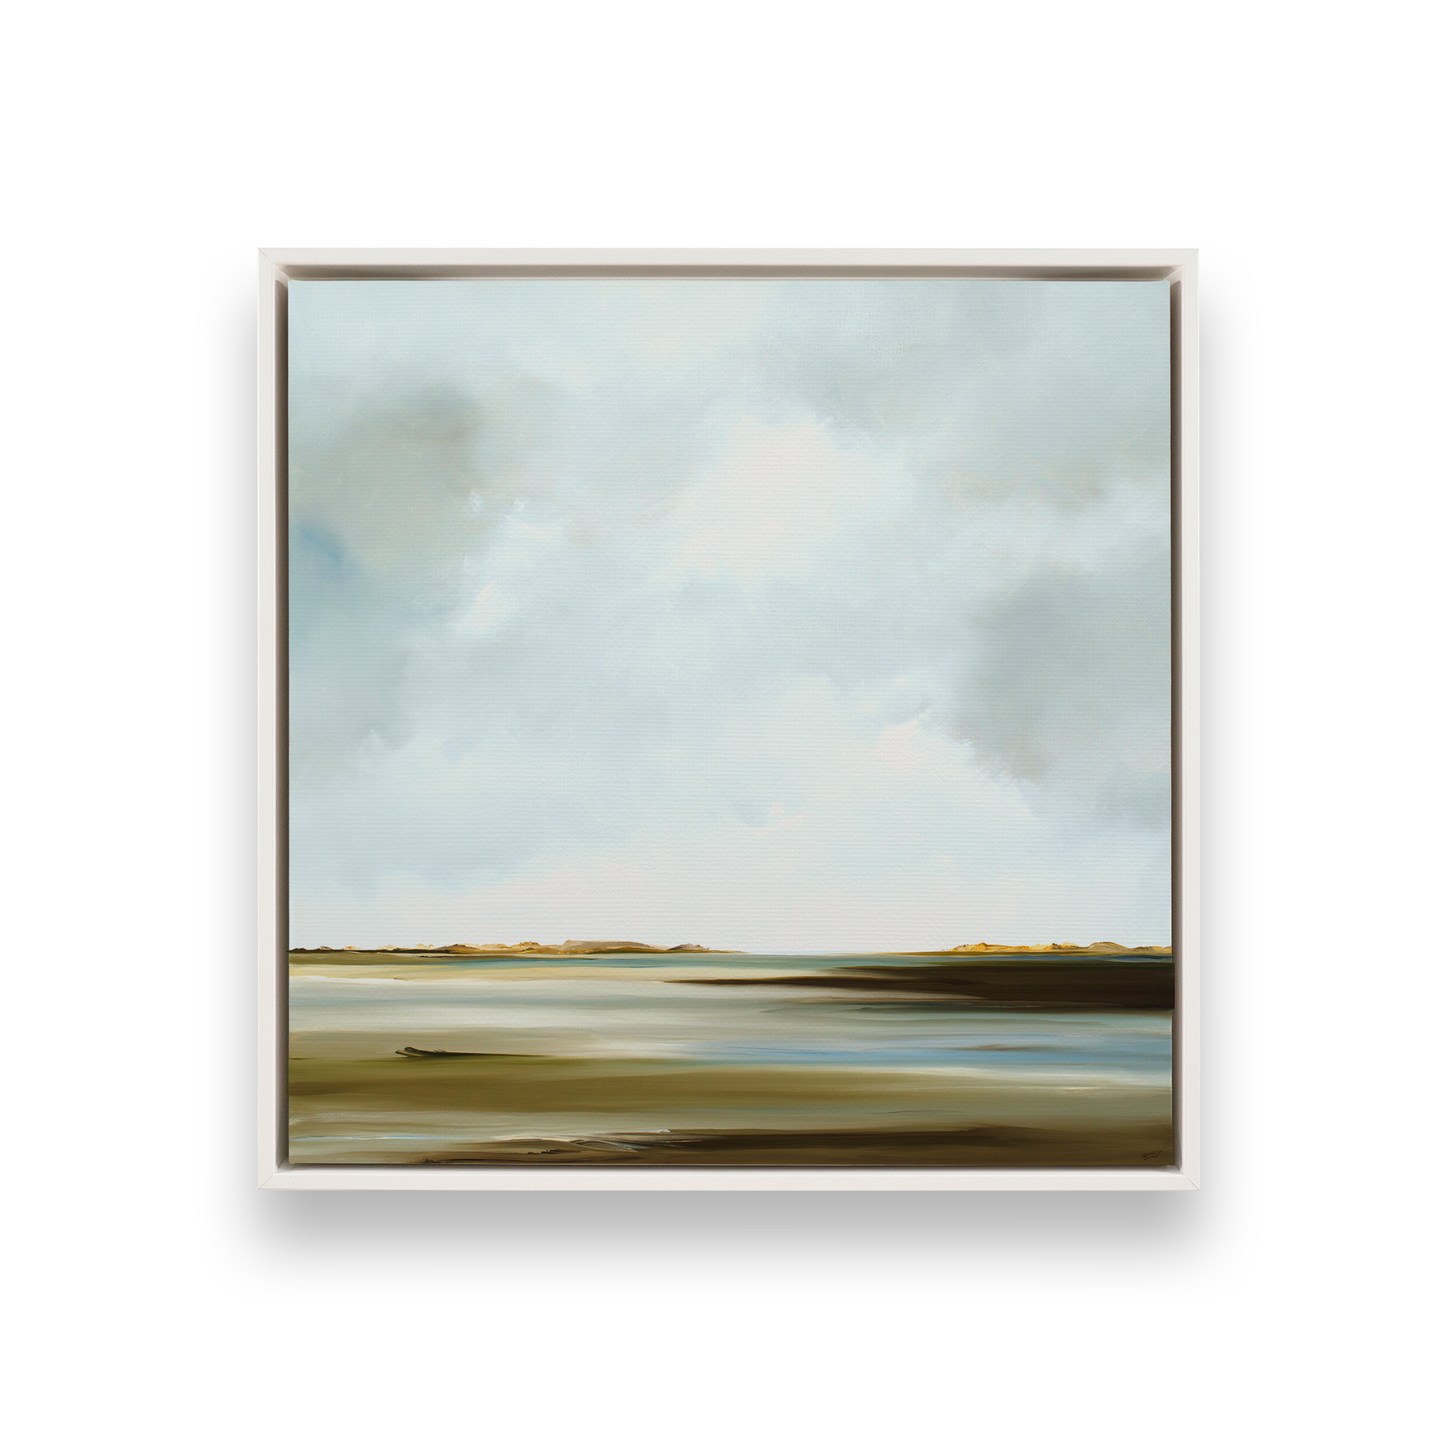 [color:Opaque White],[shape:square], Picture of art in a black frame